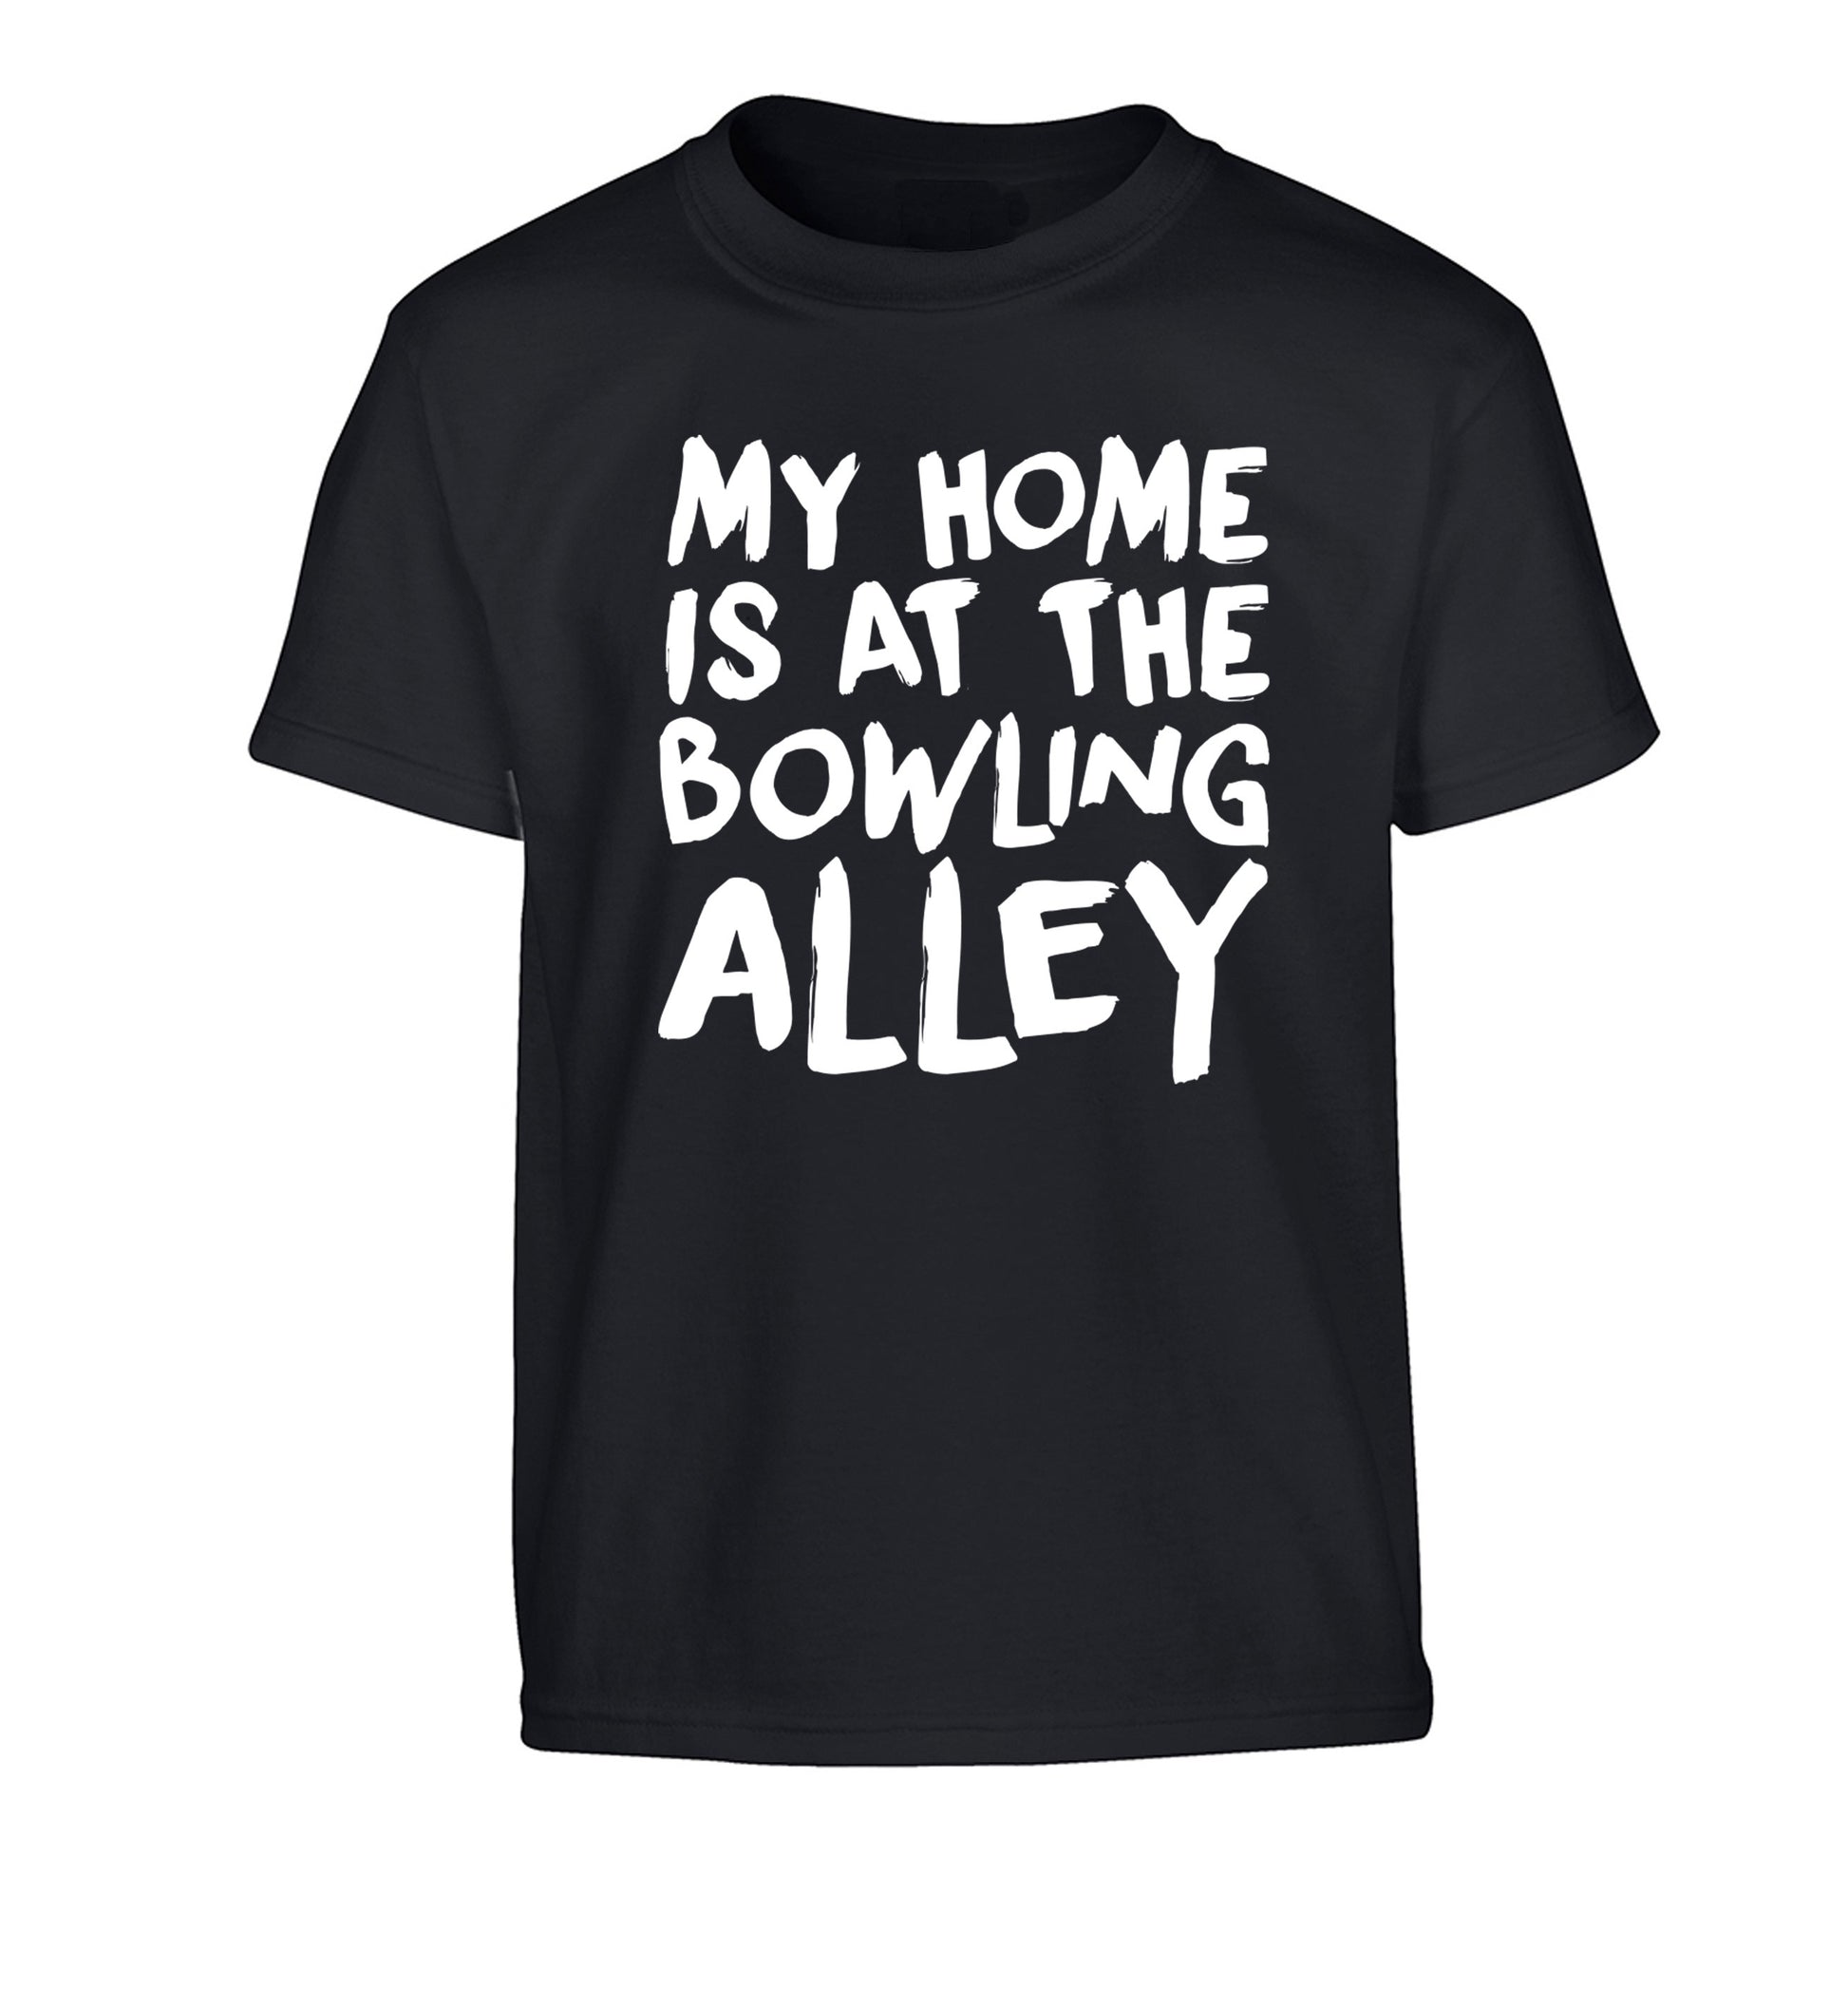 My home is at the bowling alley Children's black Tshirt 12-14 Years